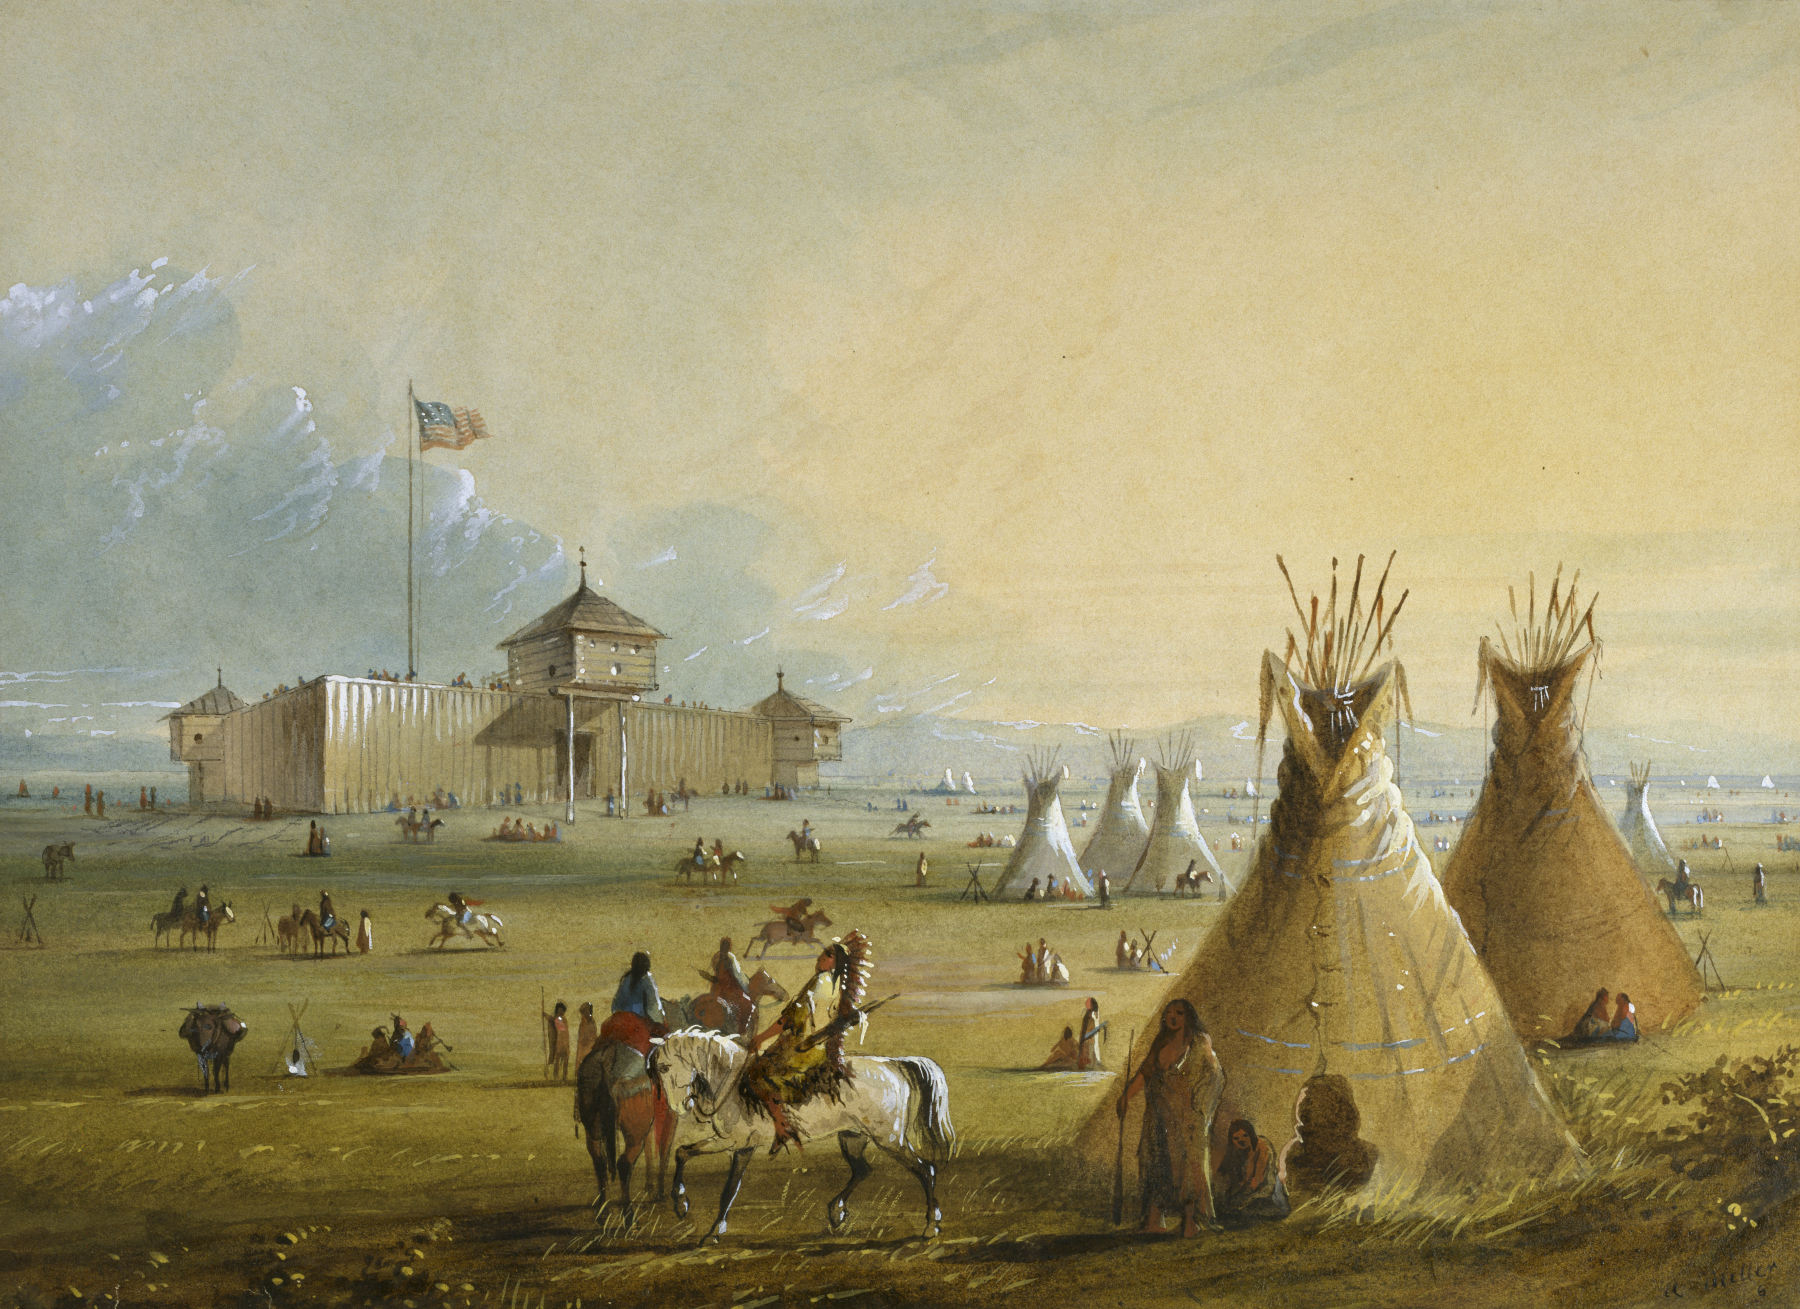 The first [[Fort Laramie